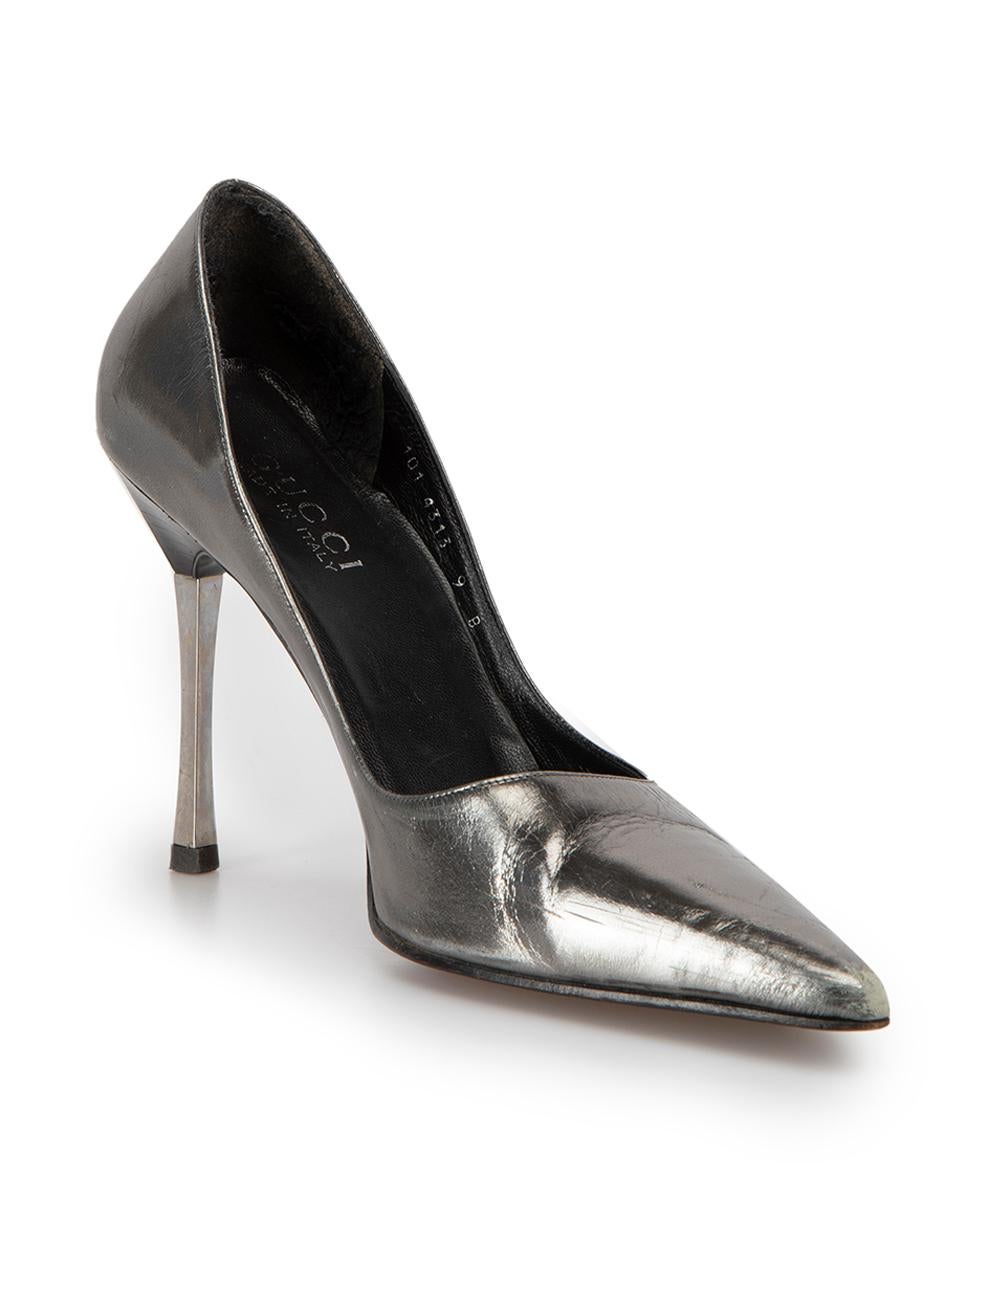 CONDITION is Good. General wear to shoes is evident. Moderate signs of wear to the exterior of leather, particularly at the toes on this used Gucci designer resale item.
 
 Details
  Silver
 Patent leather
 Pumps
 Pointed toe
 Metal high heel
